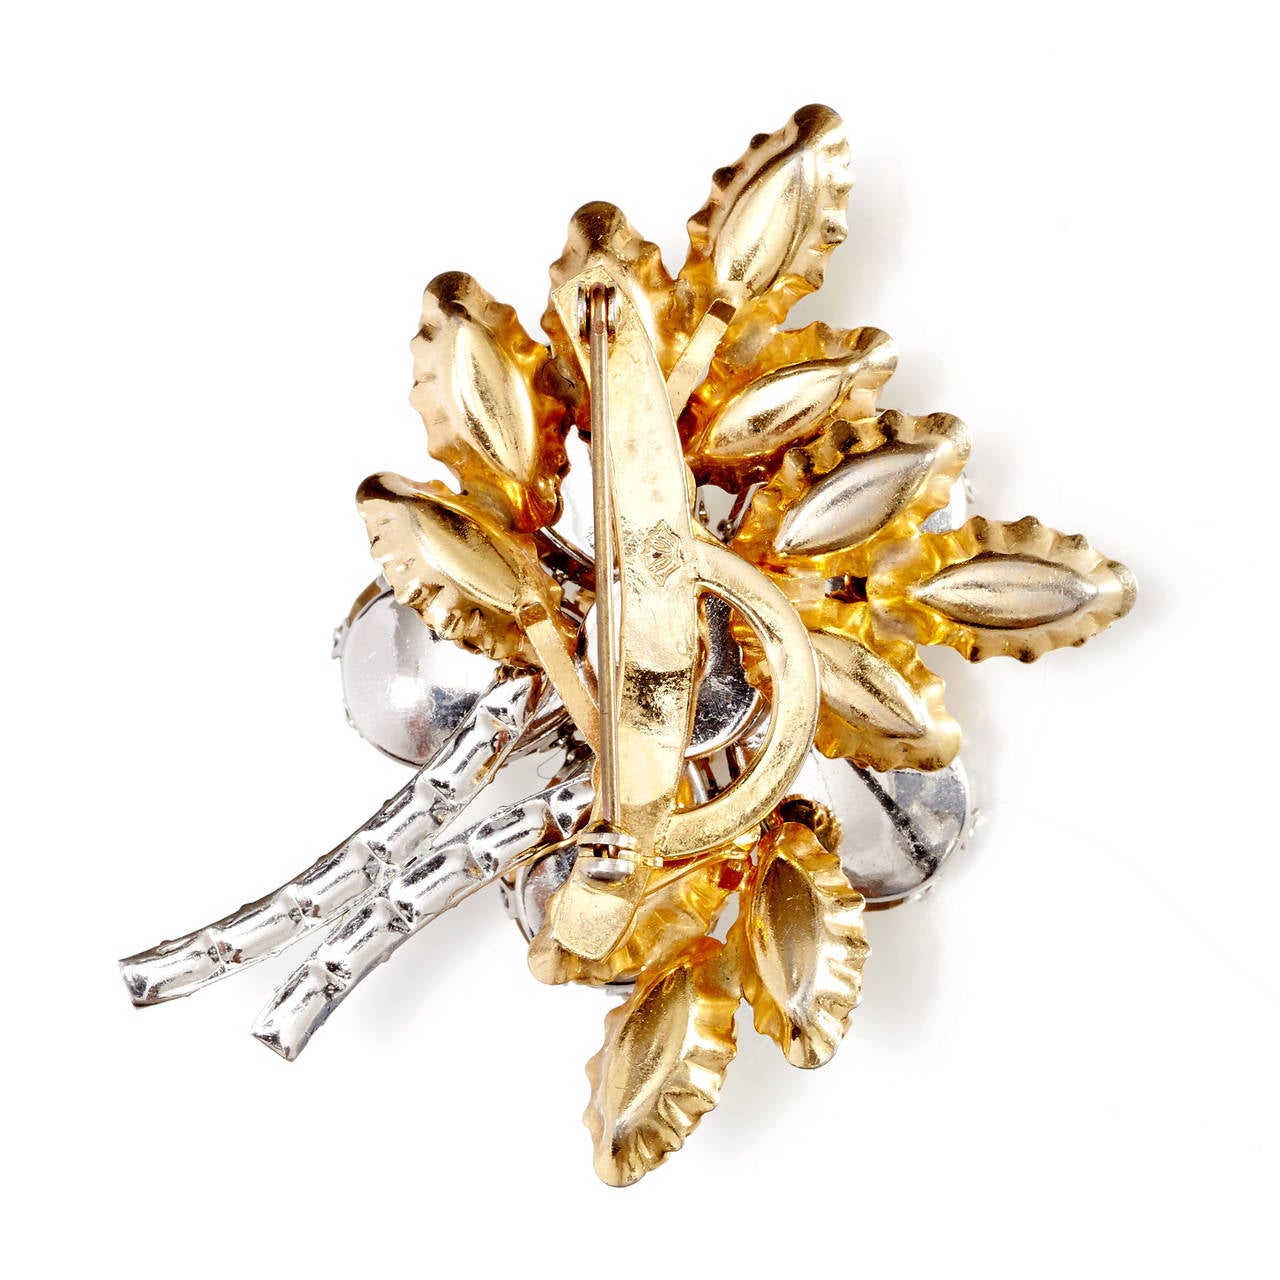 Exquisite Schoffel five petal flower brooch made in both Gold tone and Rhodium plated metal.
The ingenious layered construction is very high quality.
Each petal is a Clear faceted pear shaped rhinestone, the stamens are made up of prong set